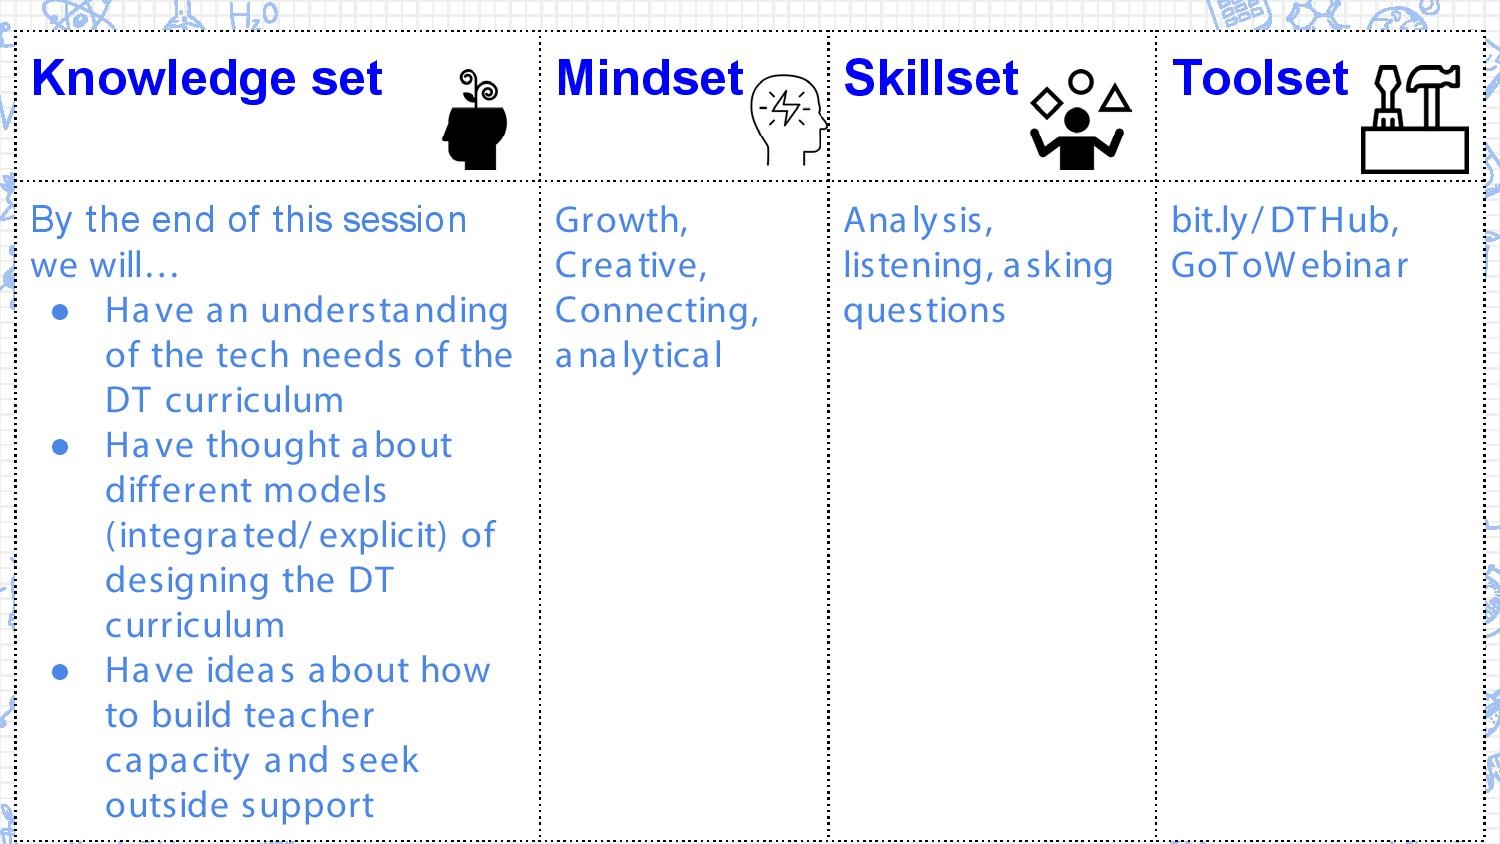 A table: the first column is titled Knowledge set. Underneath it says: By the end of this session we will have an understanding of the tech needs of the DT curriculum, have thought about different models of designing the DTcurriculum, and have ideas about how to build teacher capacity and seek outside support. The second column is titled Mindset, underneath it says Growth, creative, connecting, analytical. The third column is titled Skillset, underneath it says analysis, listening, asking questions. The fourth column is titled toolset and it contains a bitly link to a DT webinar.